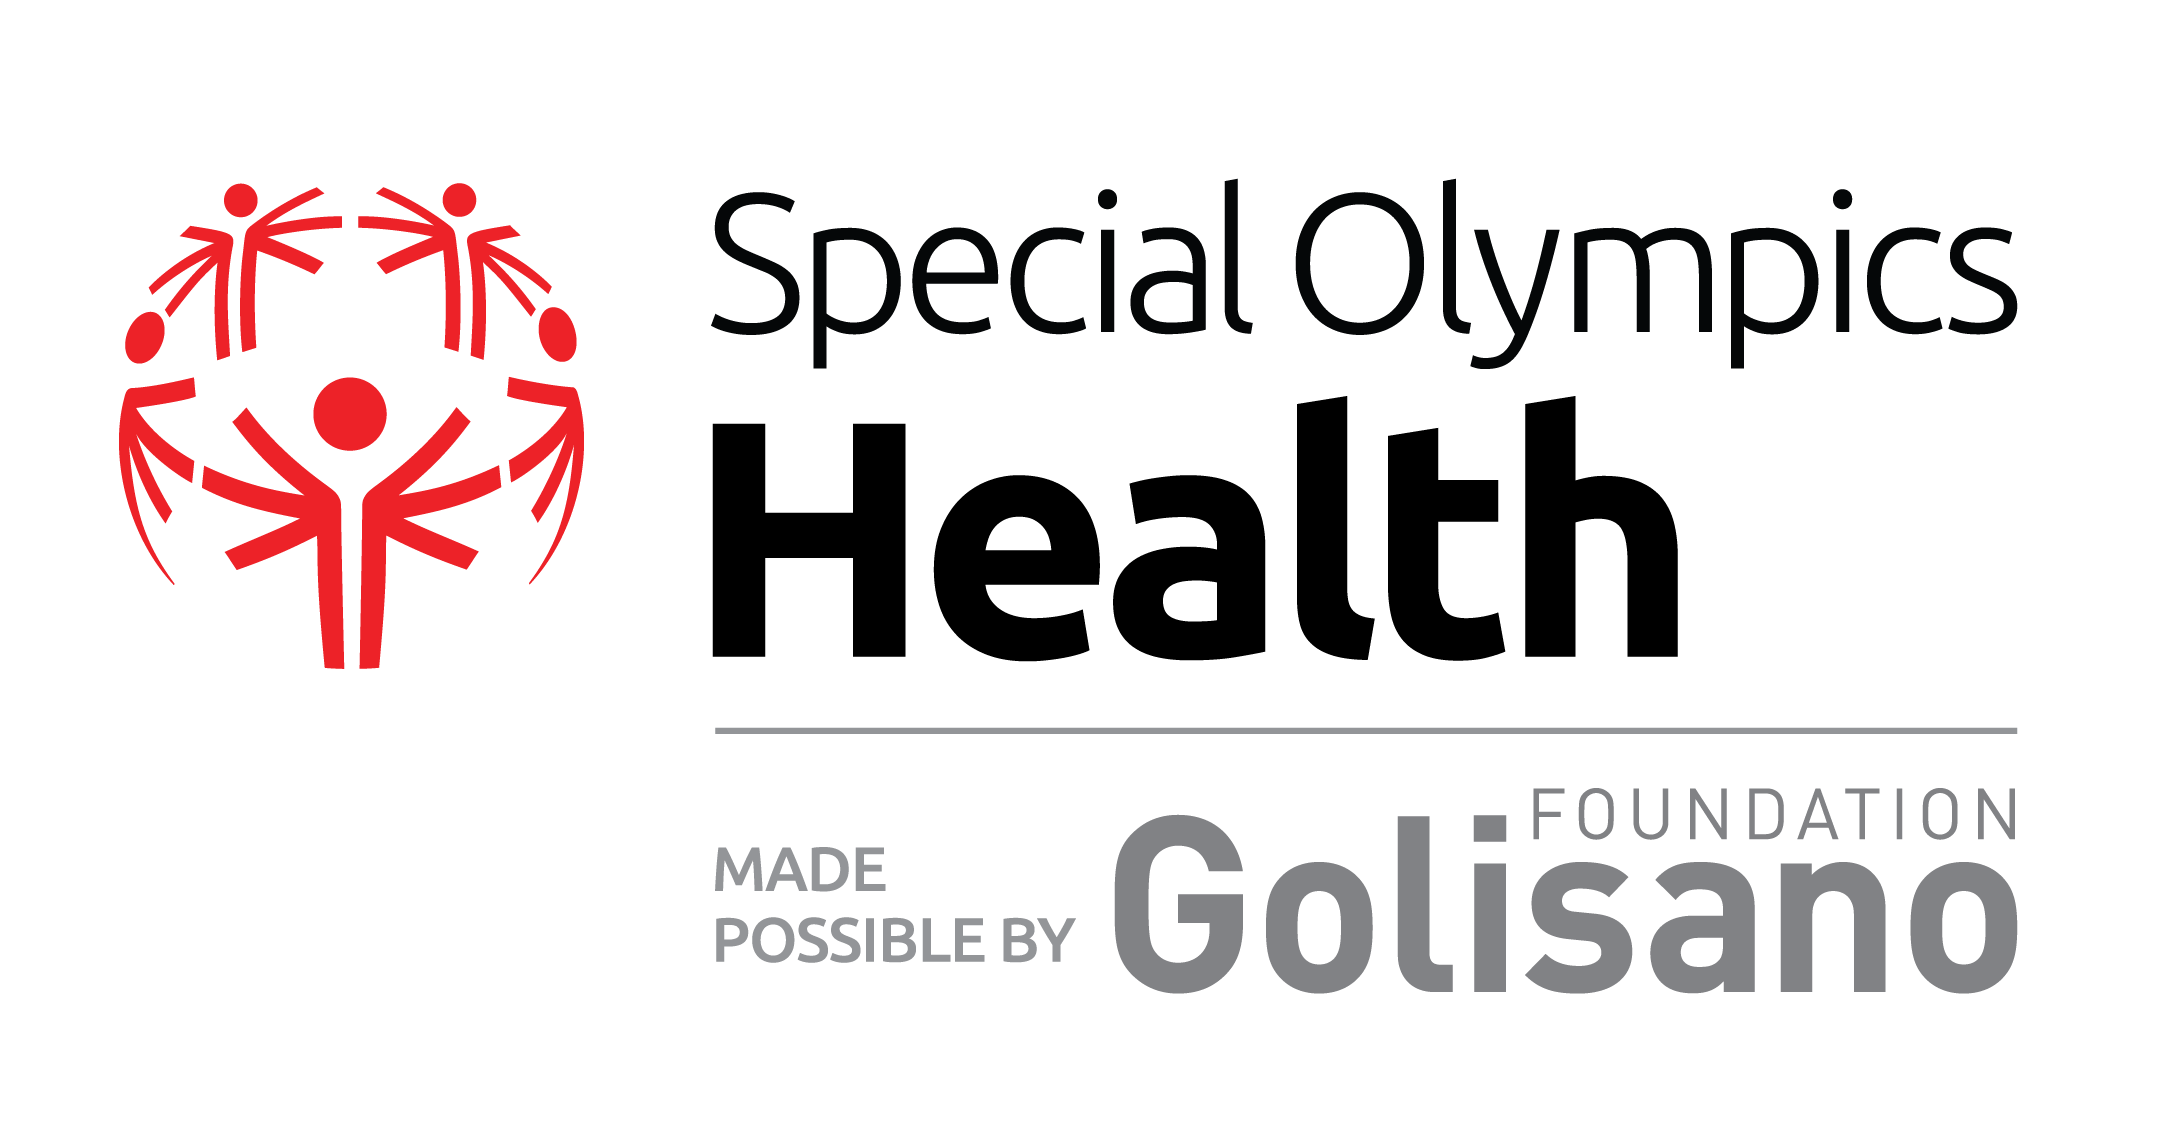 Special Olympics Health made possible by the Golisano Foundation